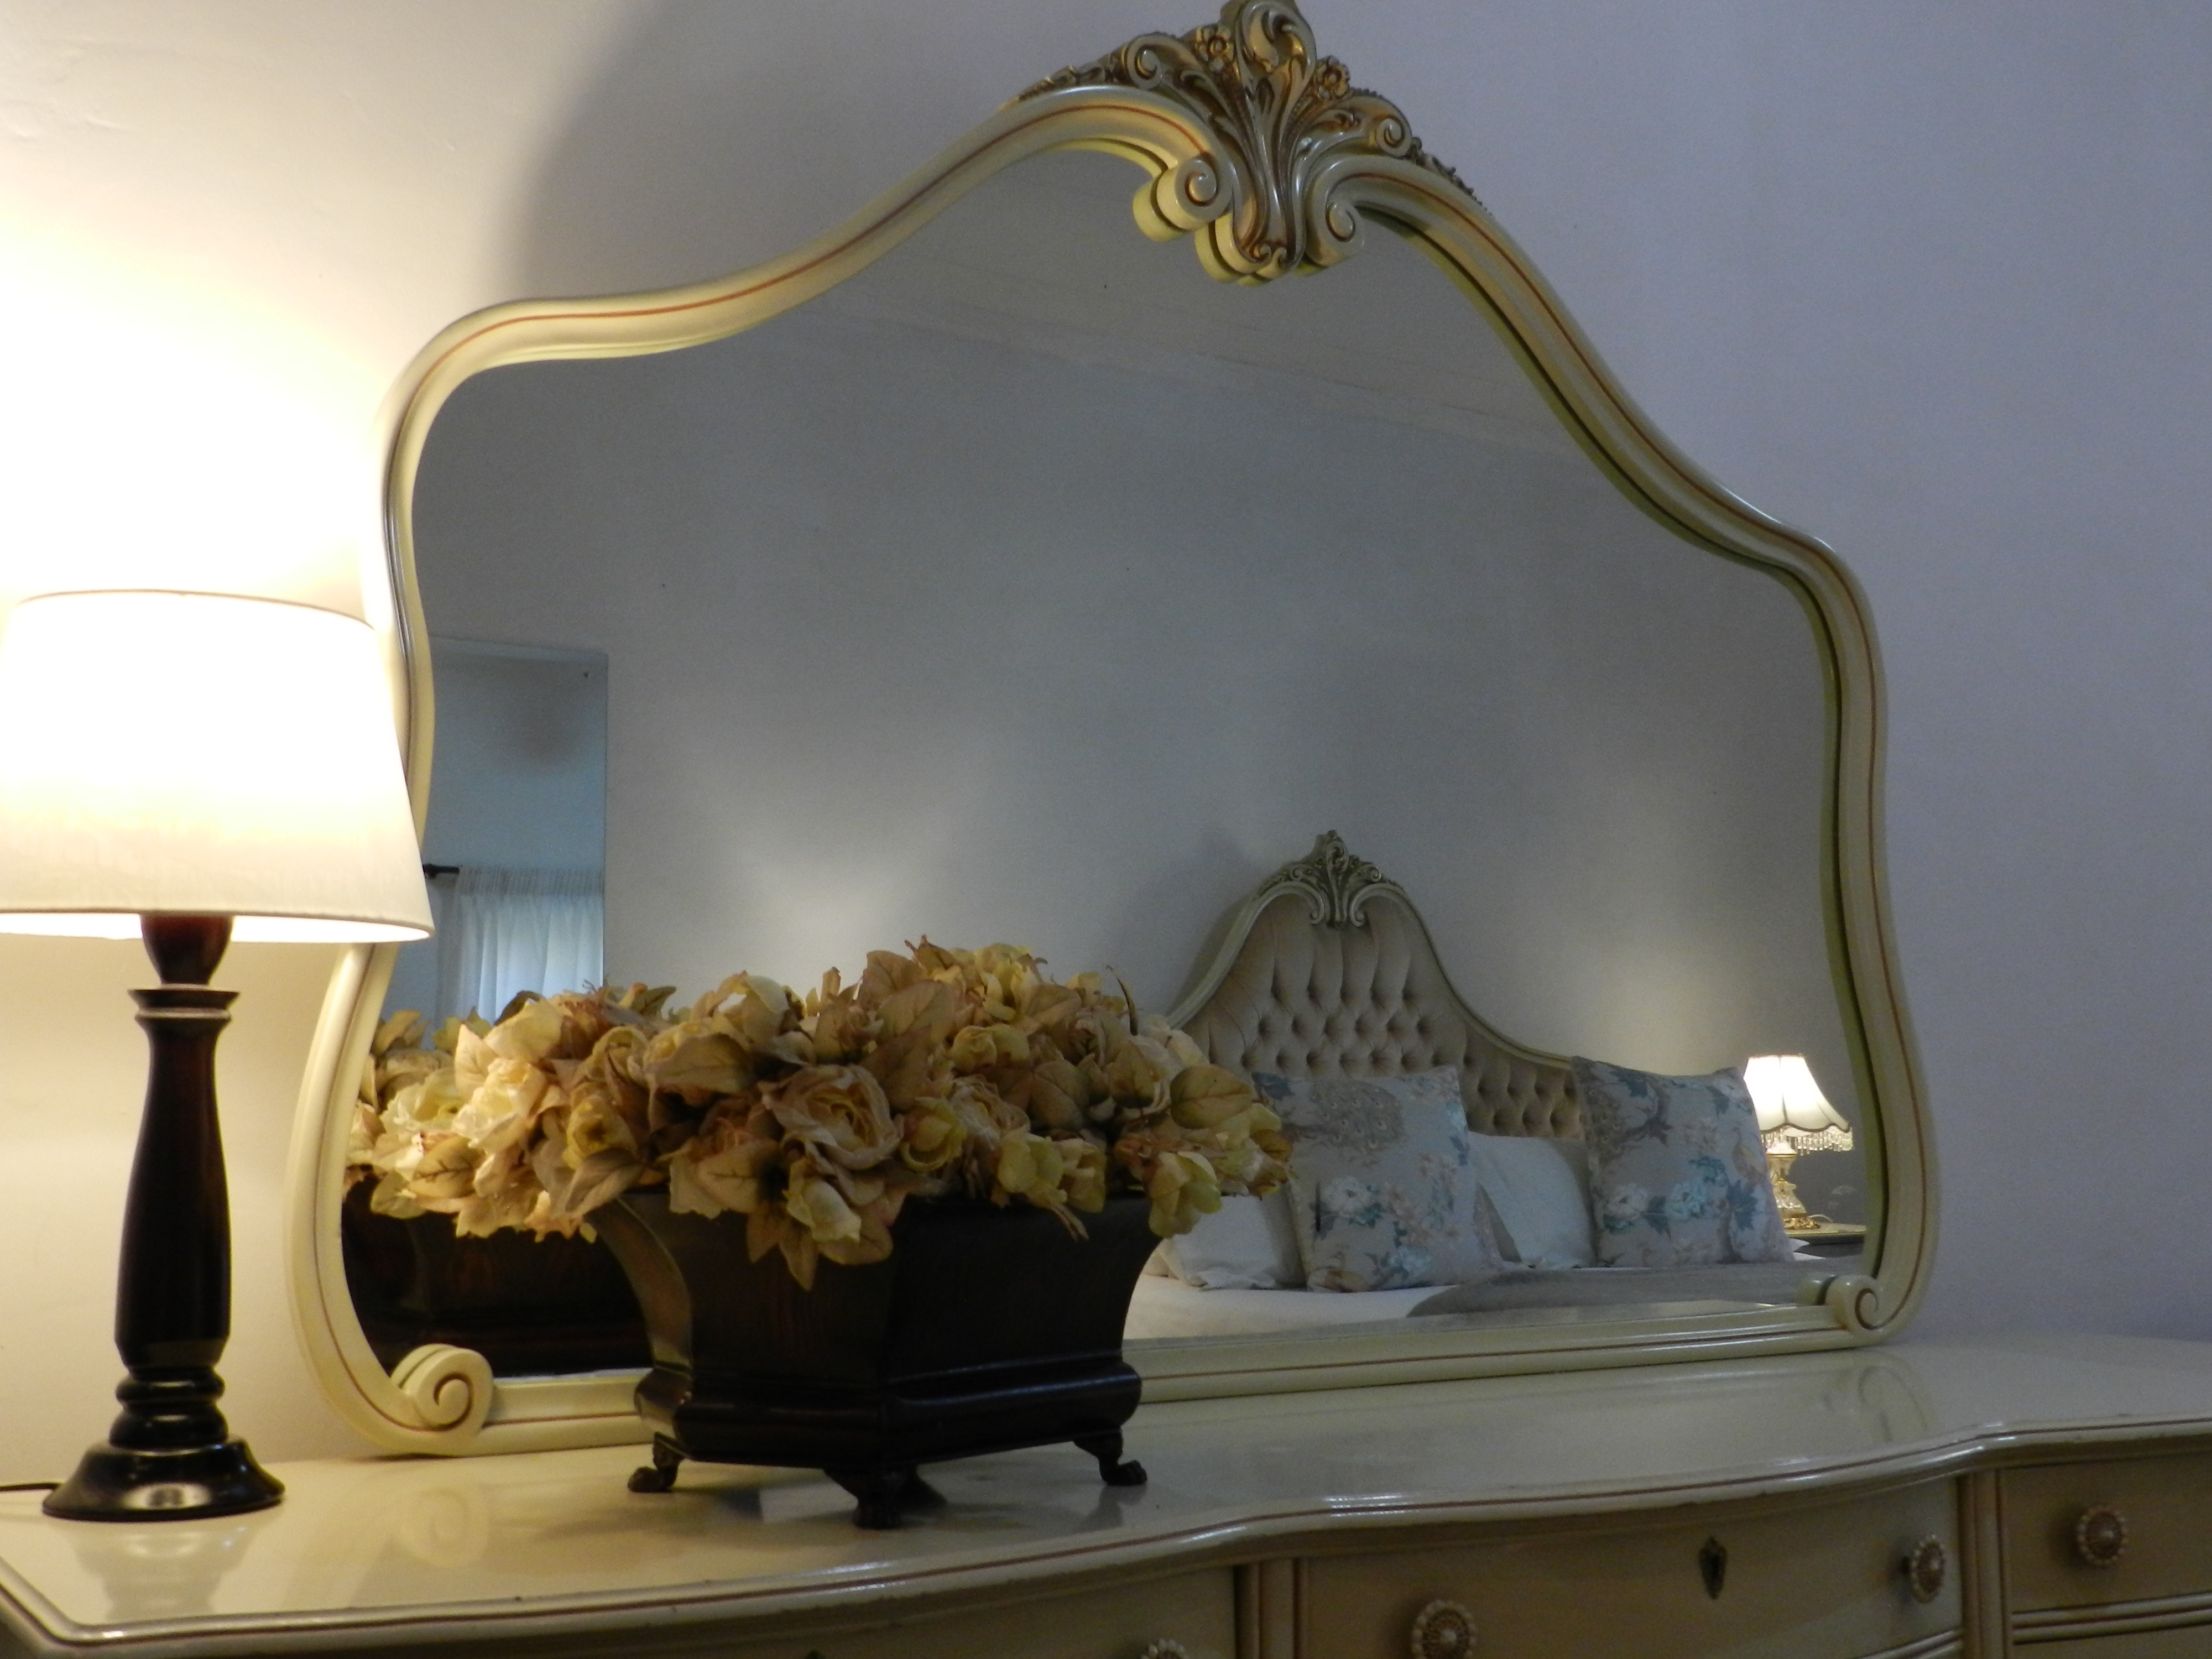 Elegant mirror in the Bridal Room, Oom Paul & Tant Gezina, at the President Paul Kruger Guest Lodge